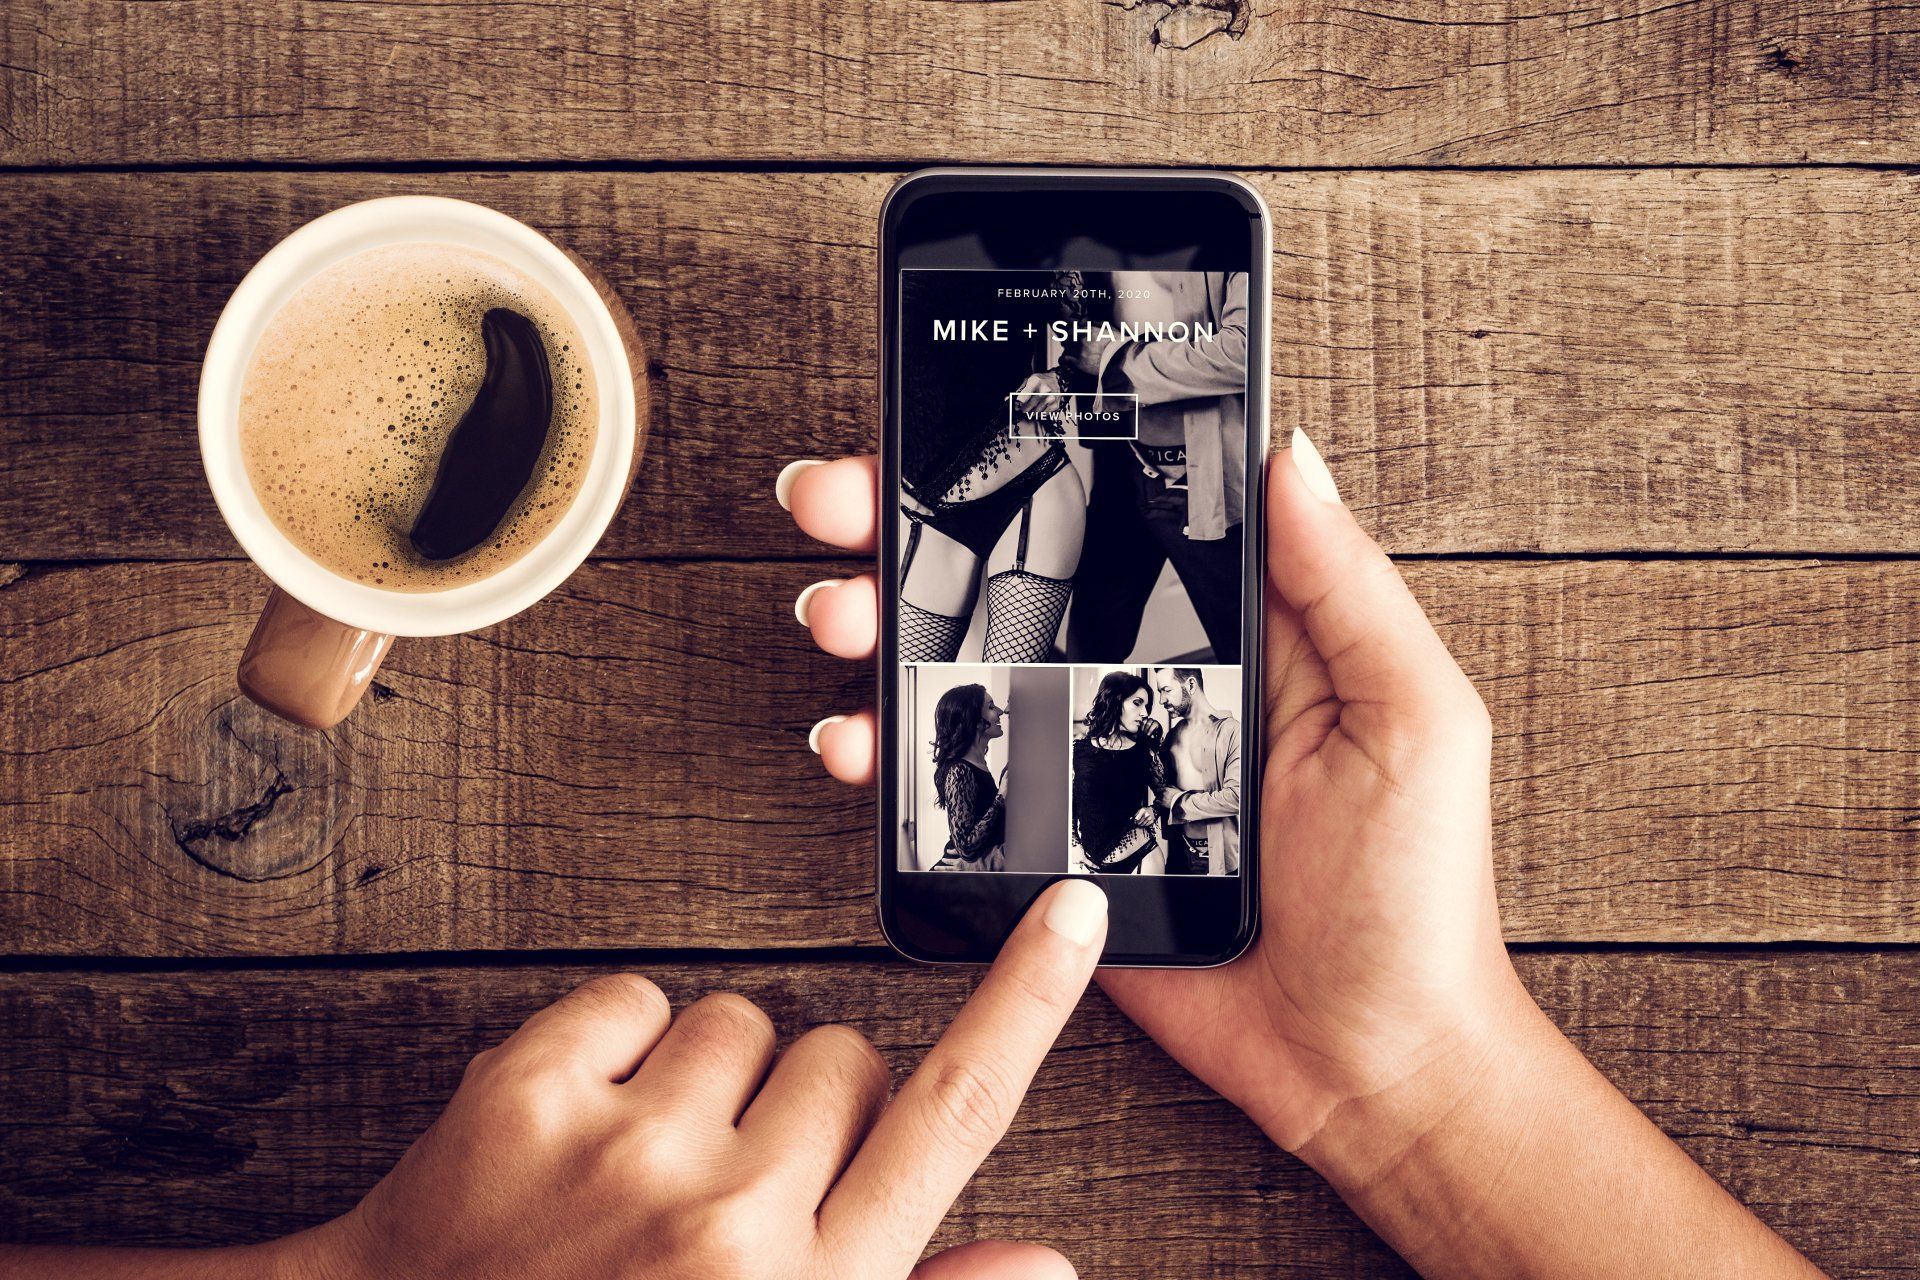 A woman's hand holds a smartphone displaying a photo of another woman. The image includes a coffee.